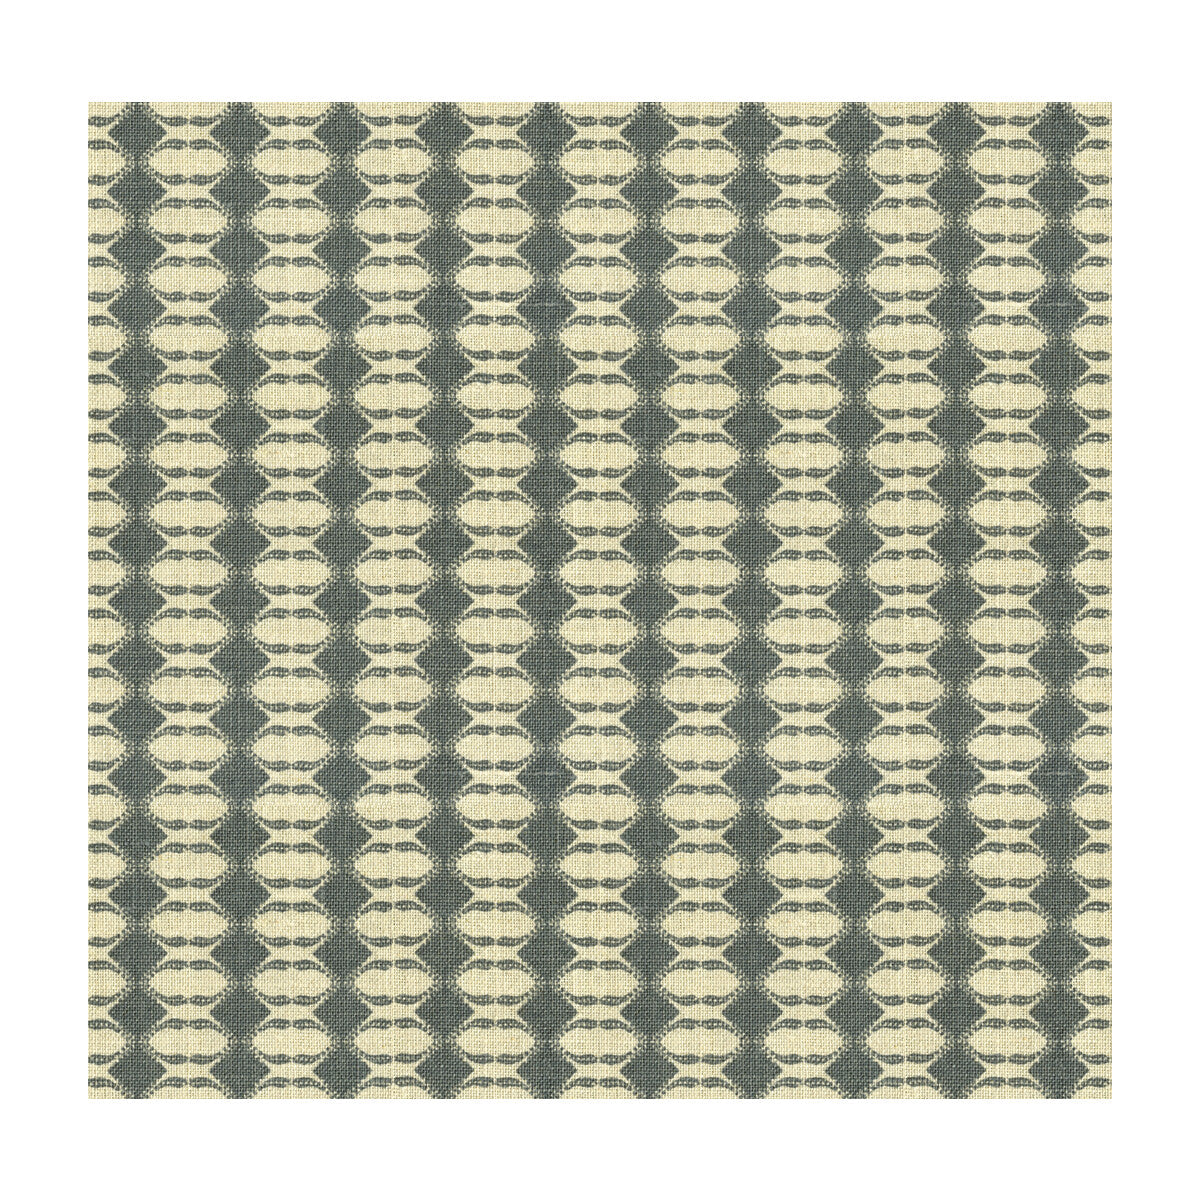 Diamond fabric in metal color - pattern GWF-3507.11.0 - by Lee Jofa Modern in the Allegra Hicks Garden collection